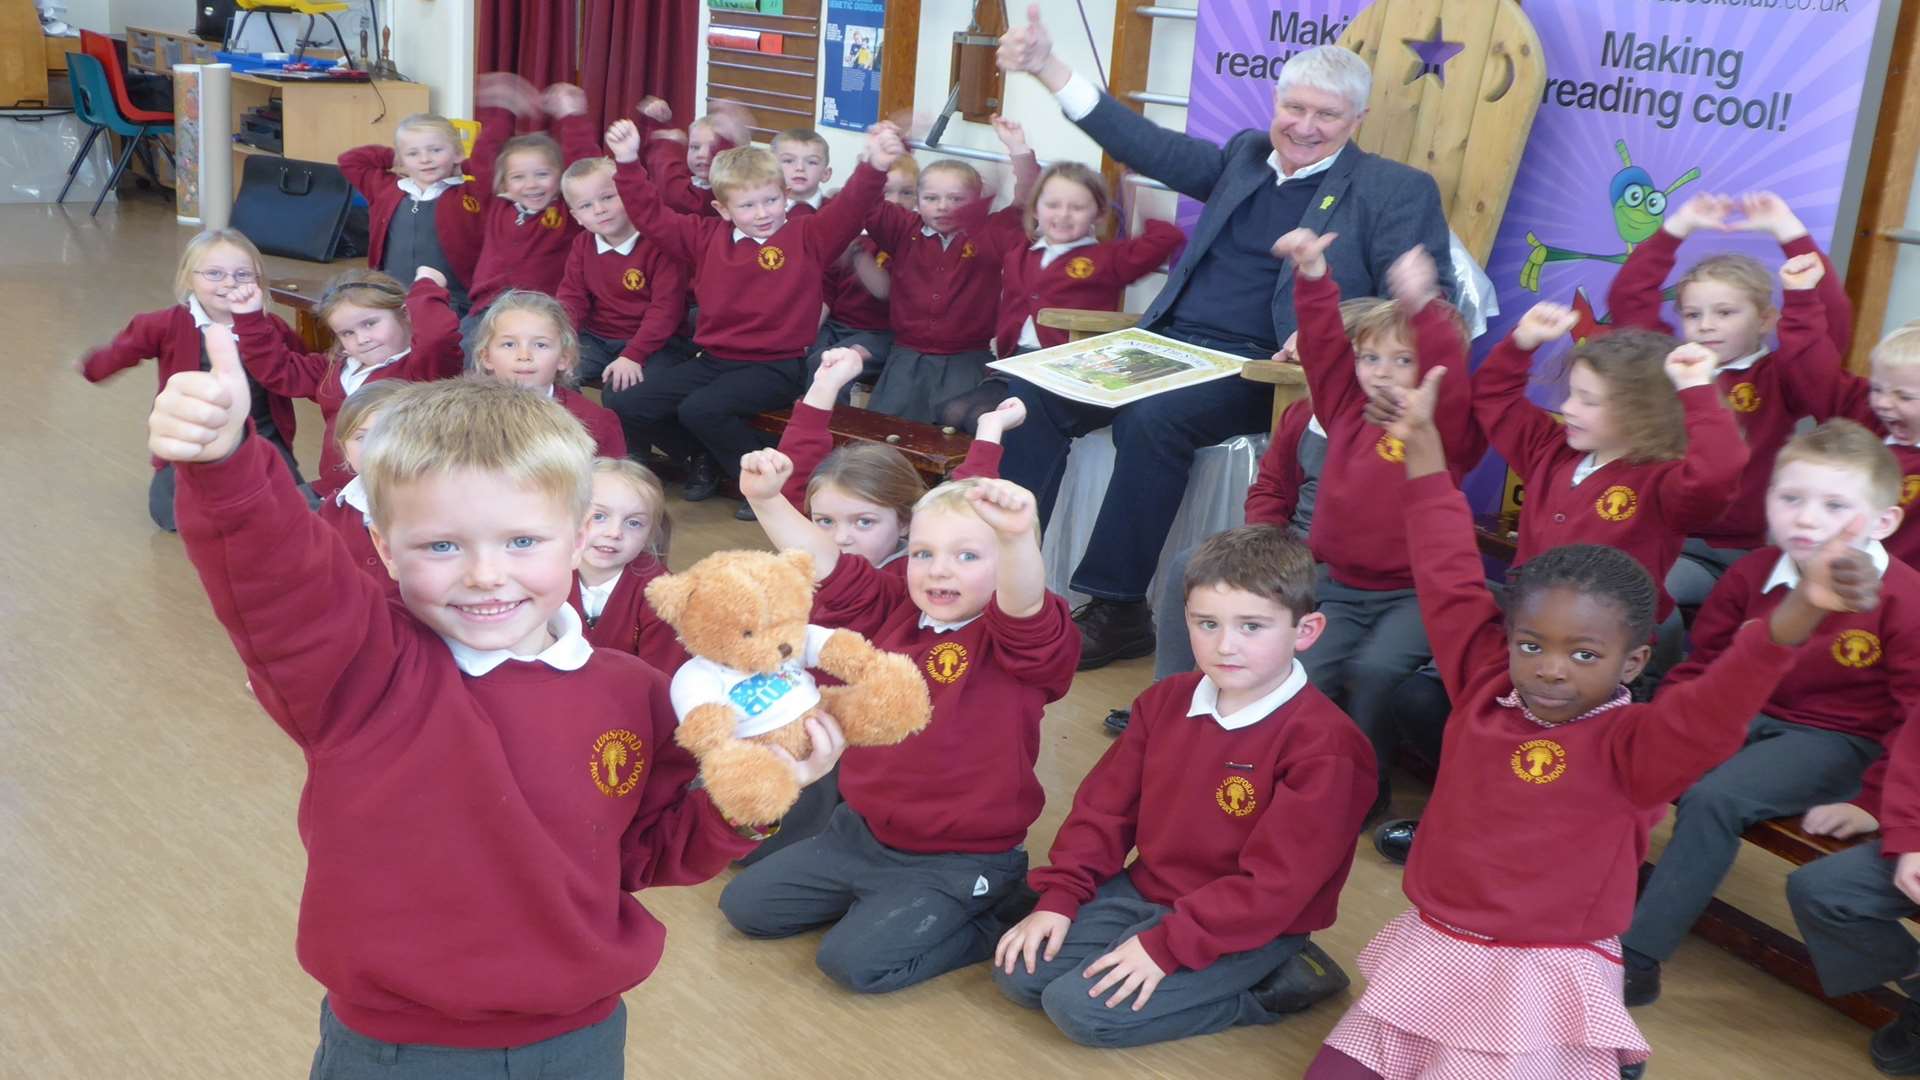 Reiss Coulter, 5, with Buster's mascot Ted cheered on by author and illustrator Nick Butterworth and classmates at Lunsford Primary School, Maidstone. Elephant Class won Kent reading challenge organised through Buster's Book Club.